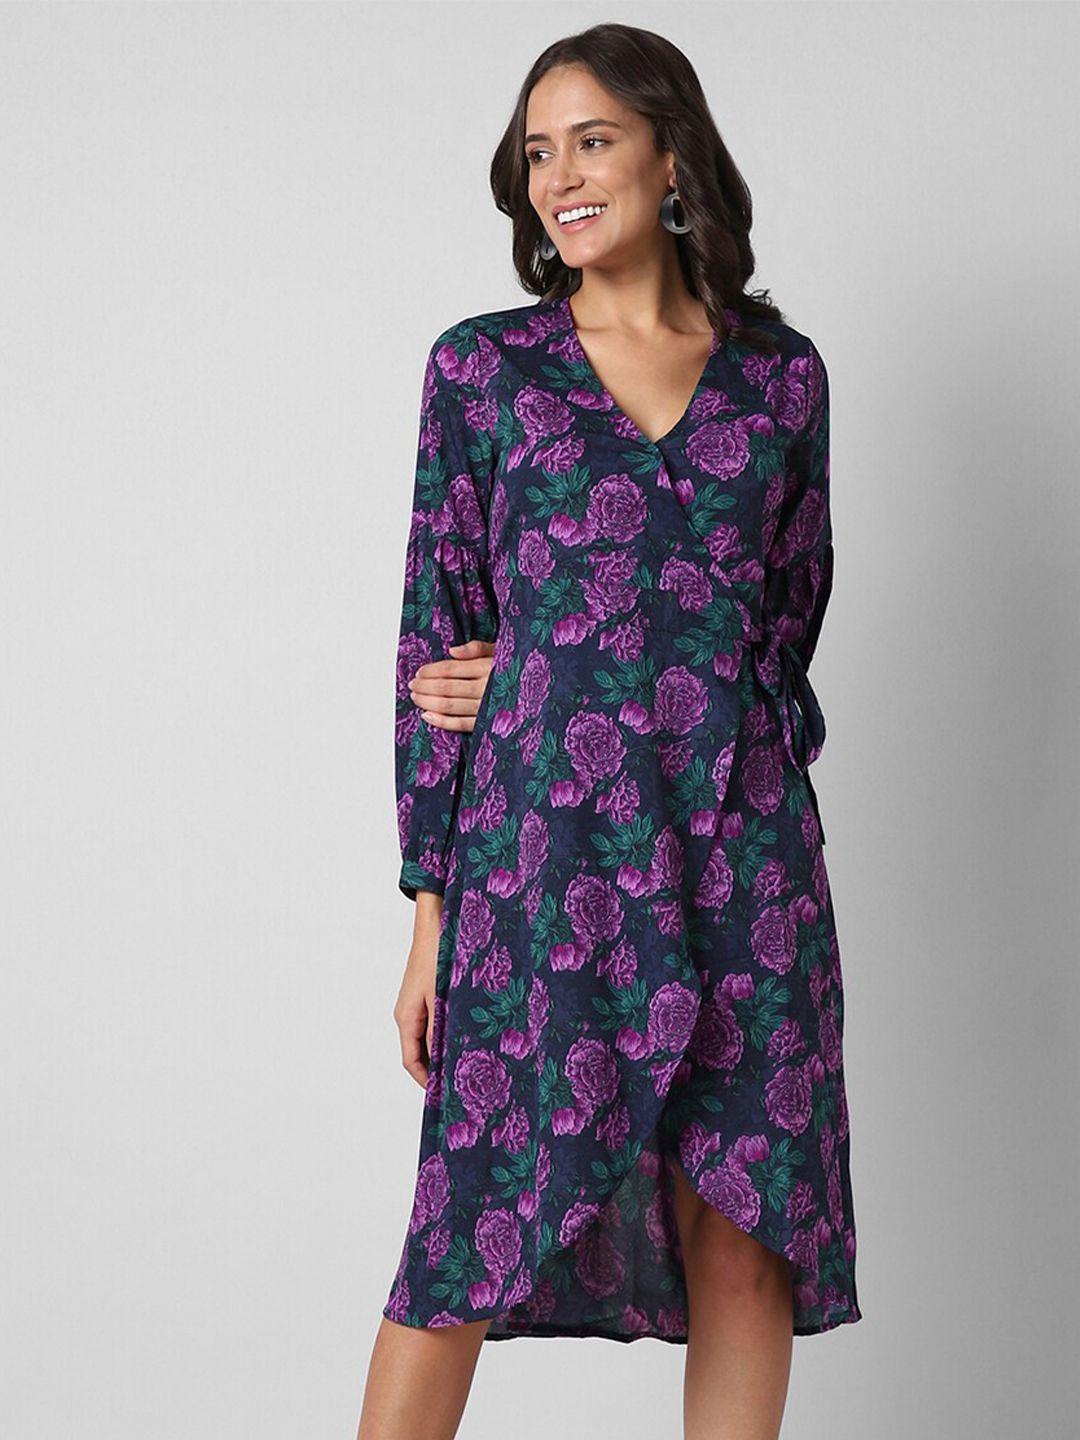 pantaloons floral printed v-neck cuffed sleeves tie-ups detail wrap dress